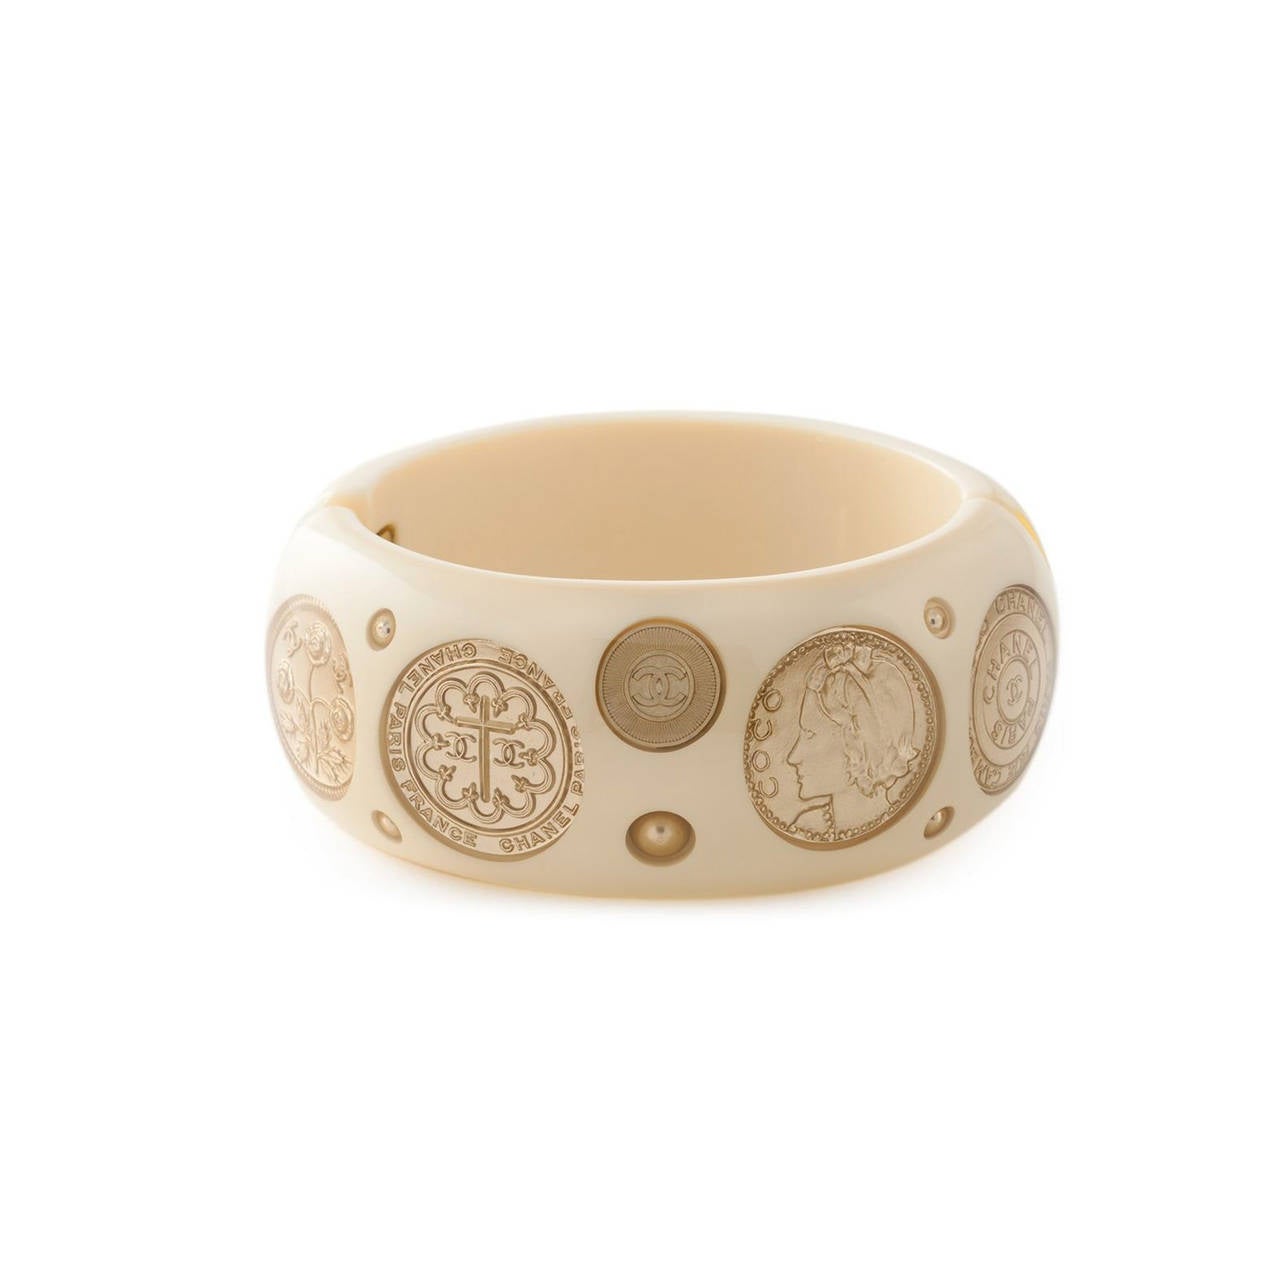 This Beige resin cambon coin bangle from Chanel features a clasp fastening, an internal logo plaque and coin appliqués.

Measurement: Width: 3 cm, Circumference: 17.8 cm

Material: Resin,Metal

Colour: Beige, Gold